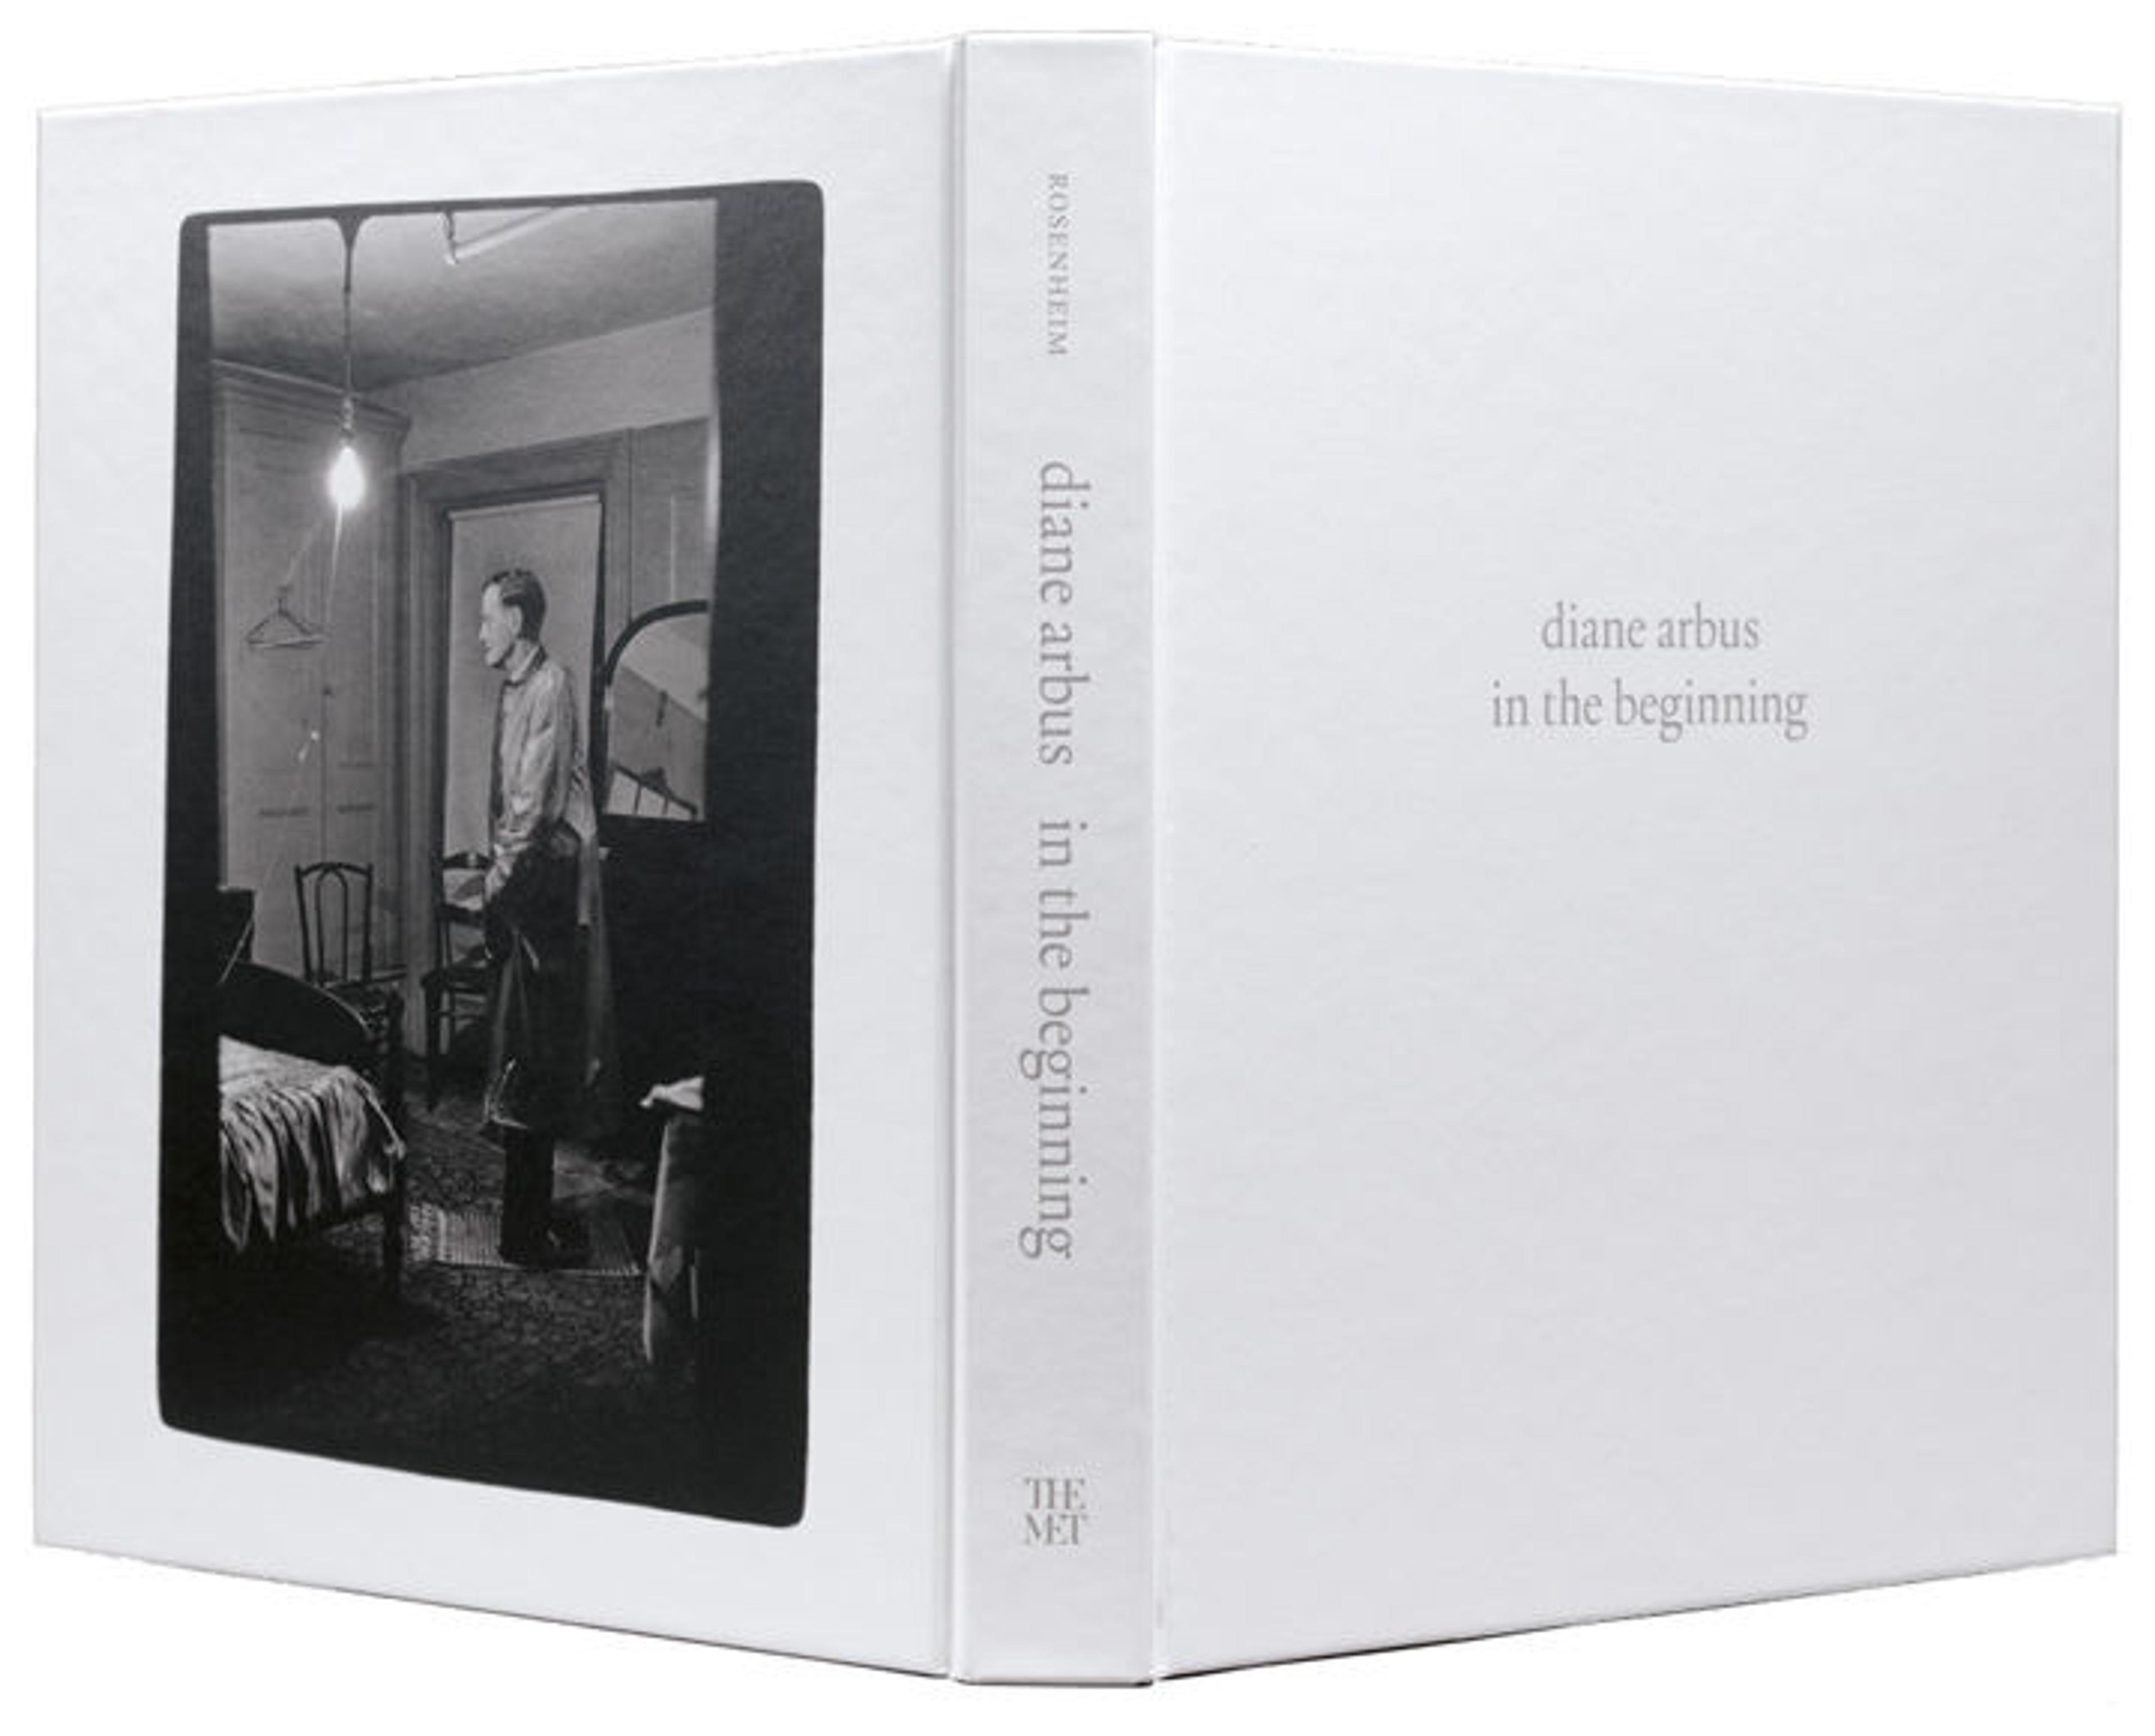 View of the front and back cover of the "diane arbus: in the beginning" exhibition catalogue